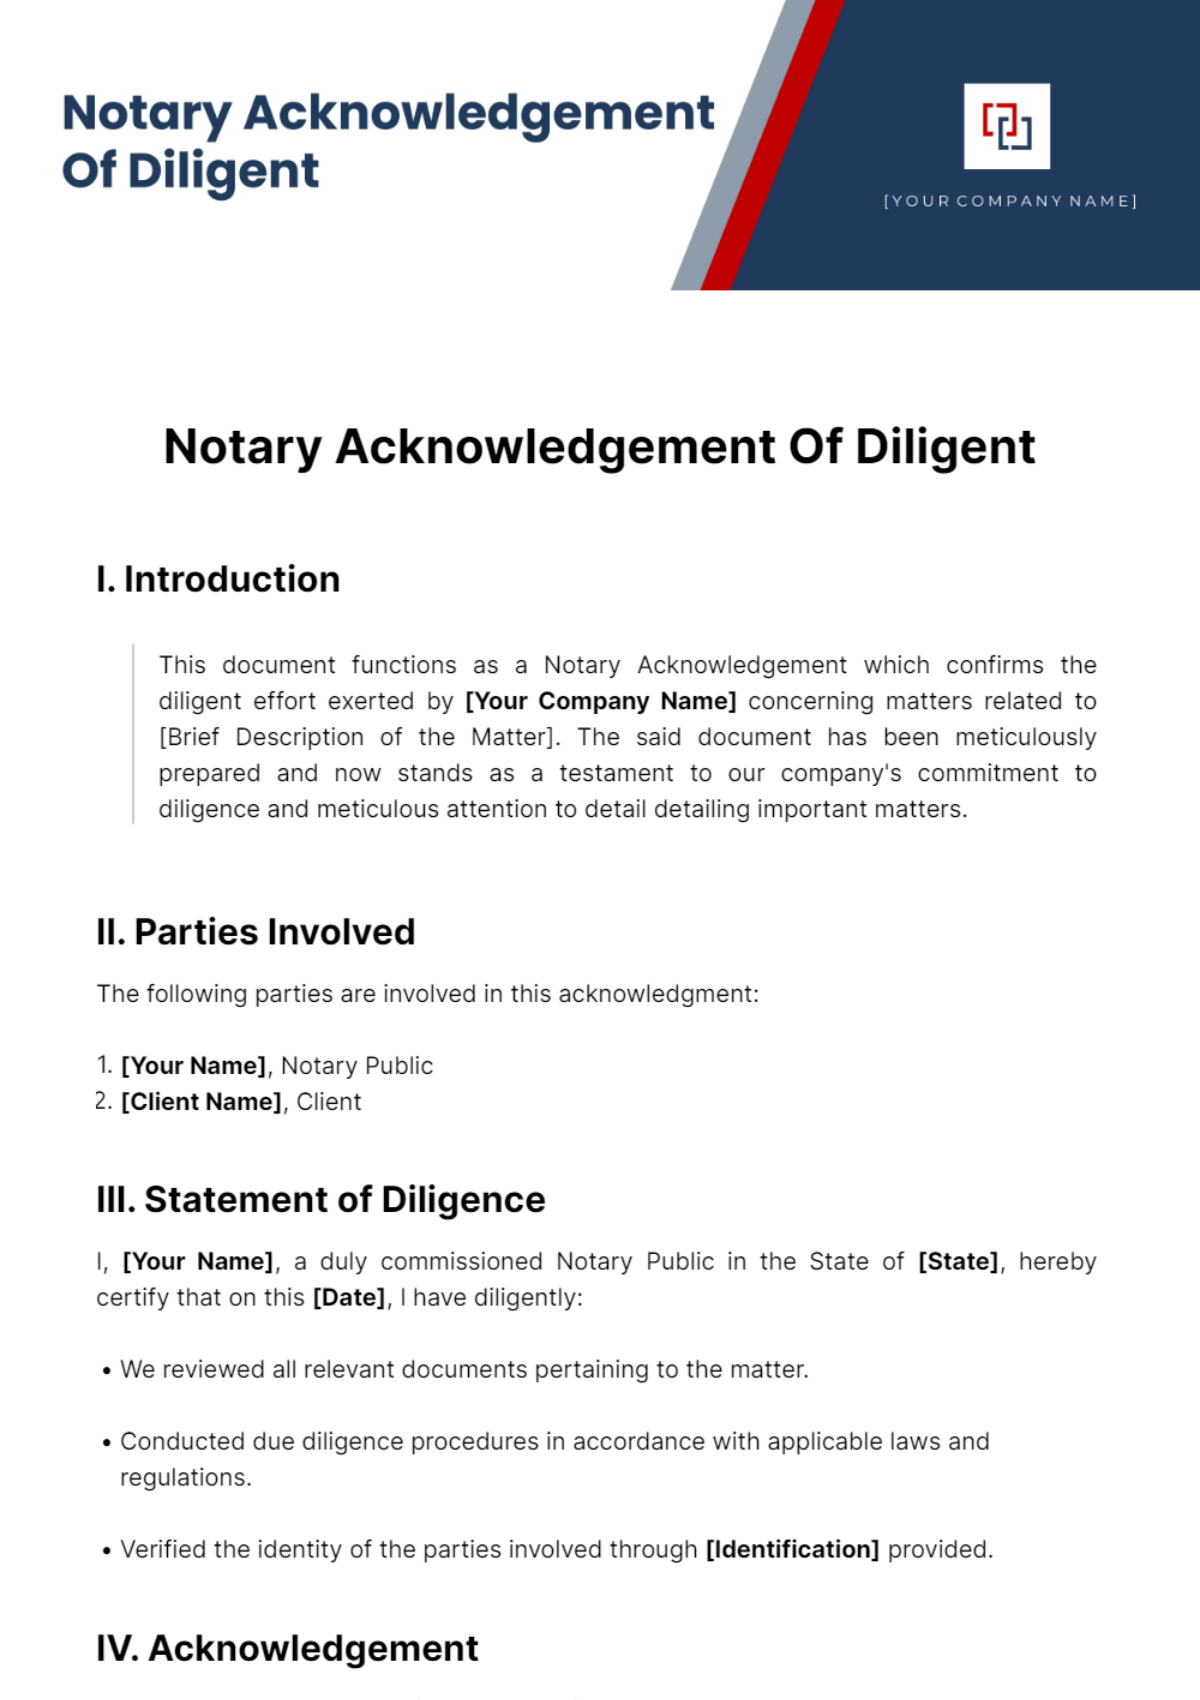 Free Notary Acknowledgement Of Diligent Template